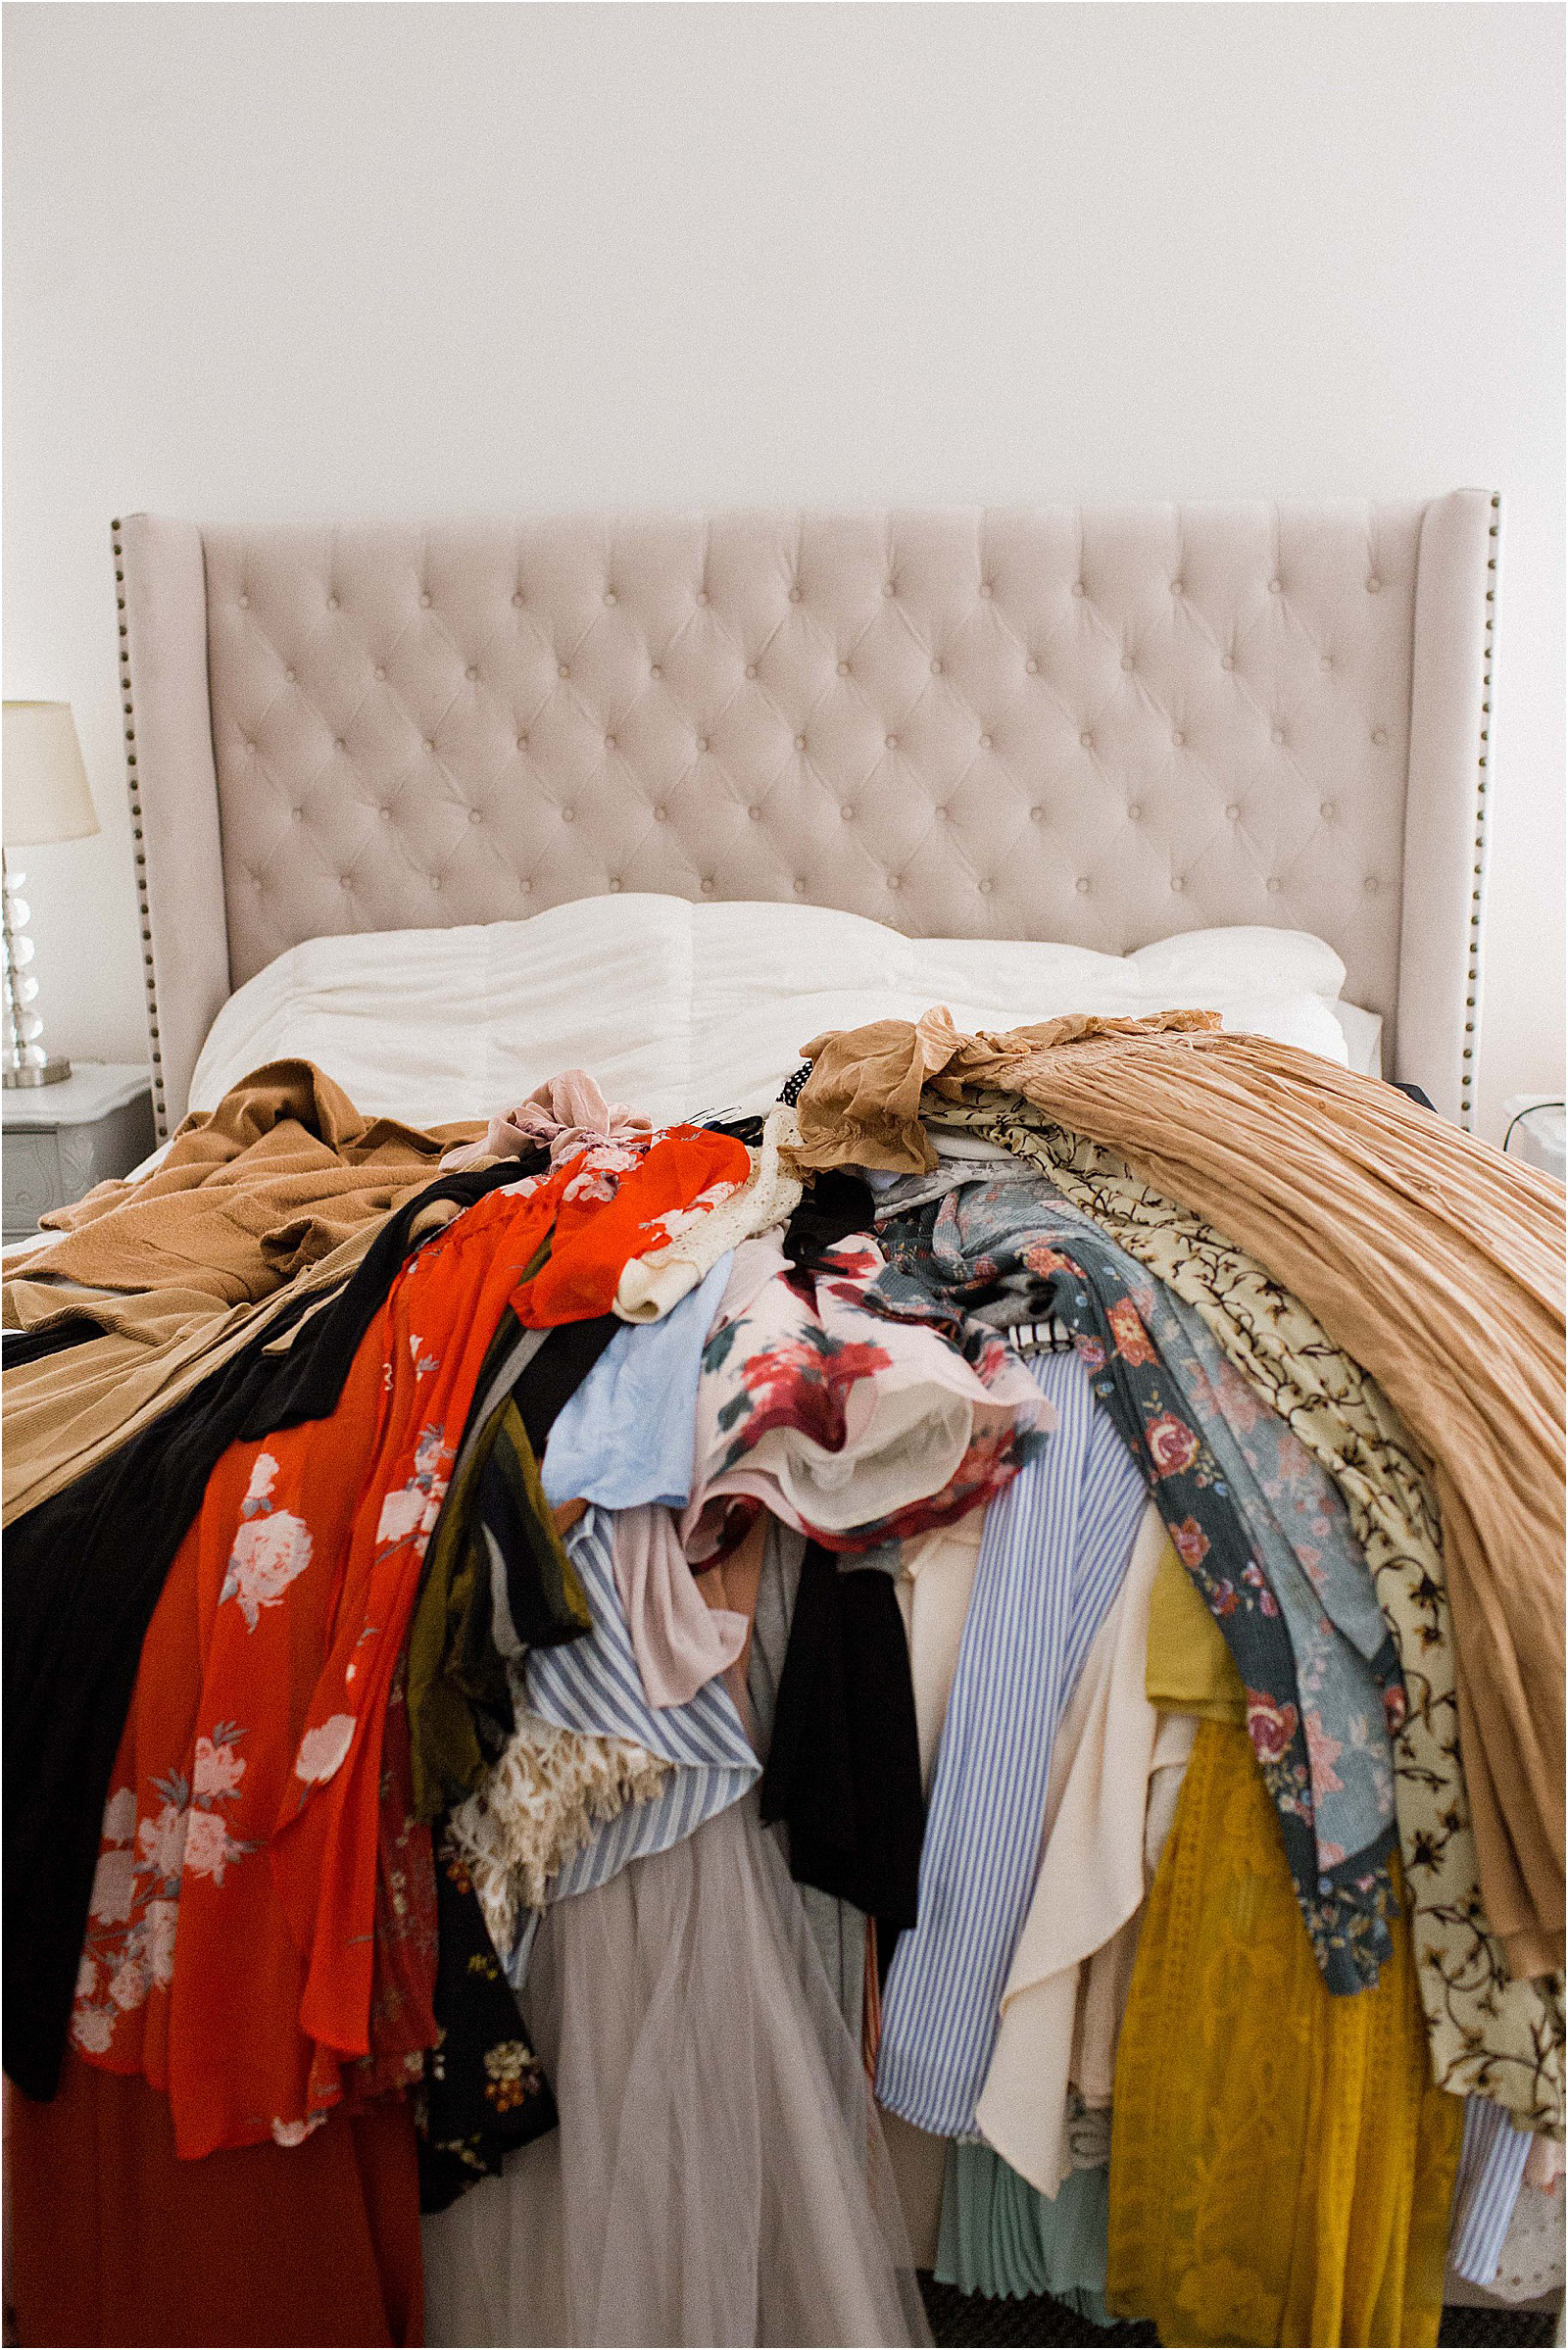 pile of clothes on the bed